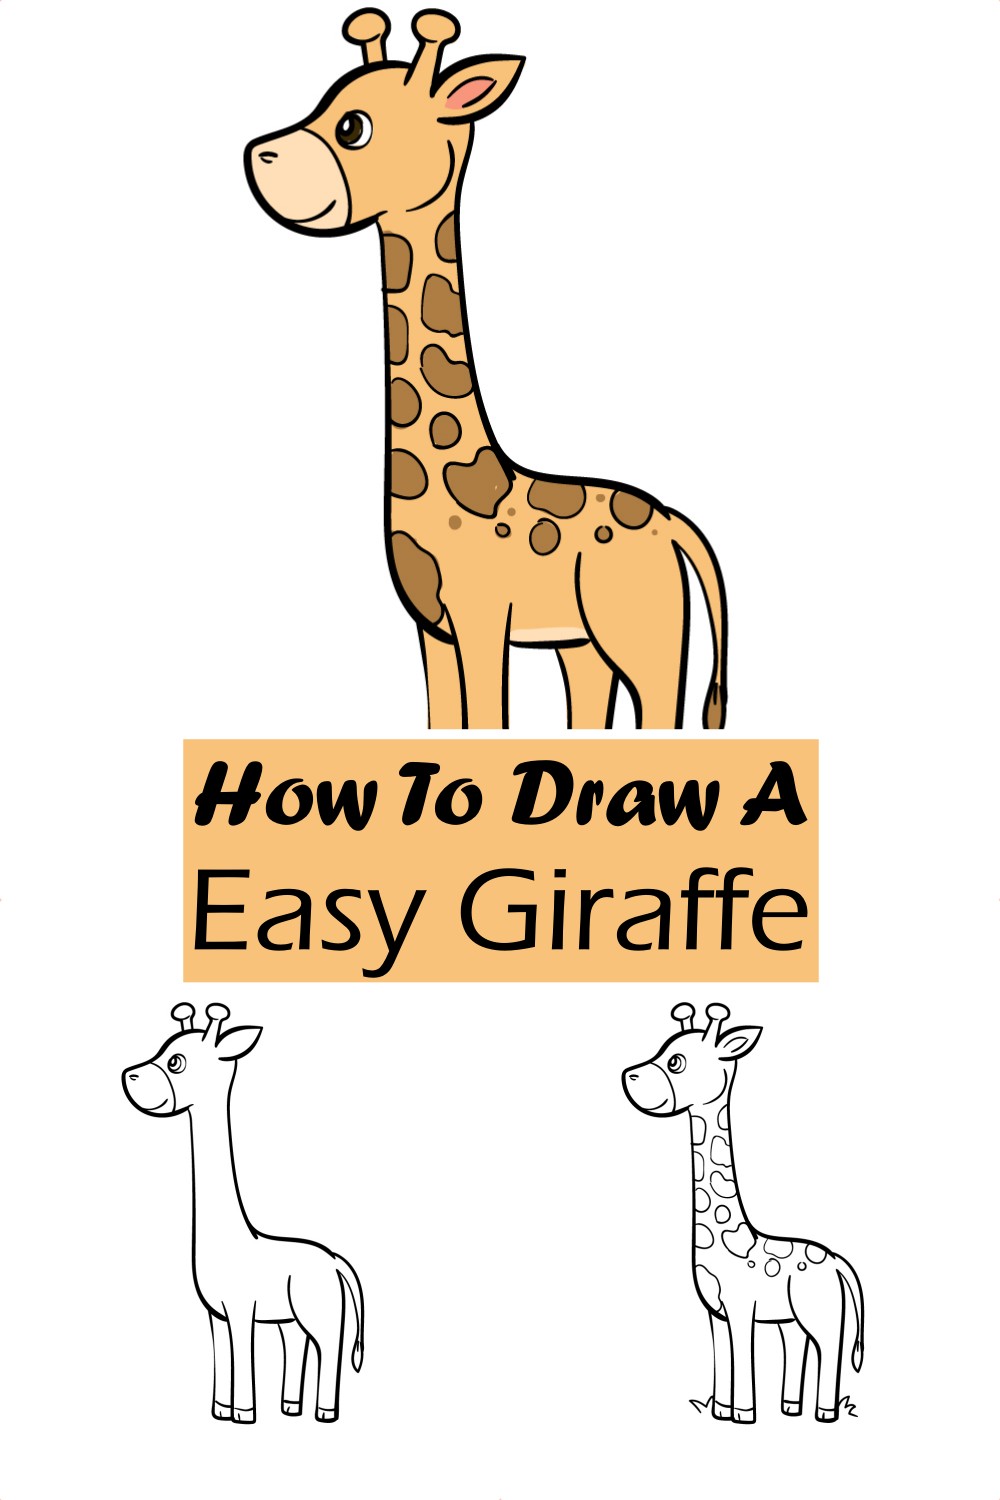 How To Draw A Easy Giraffe